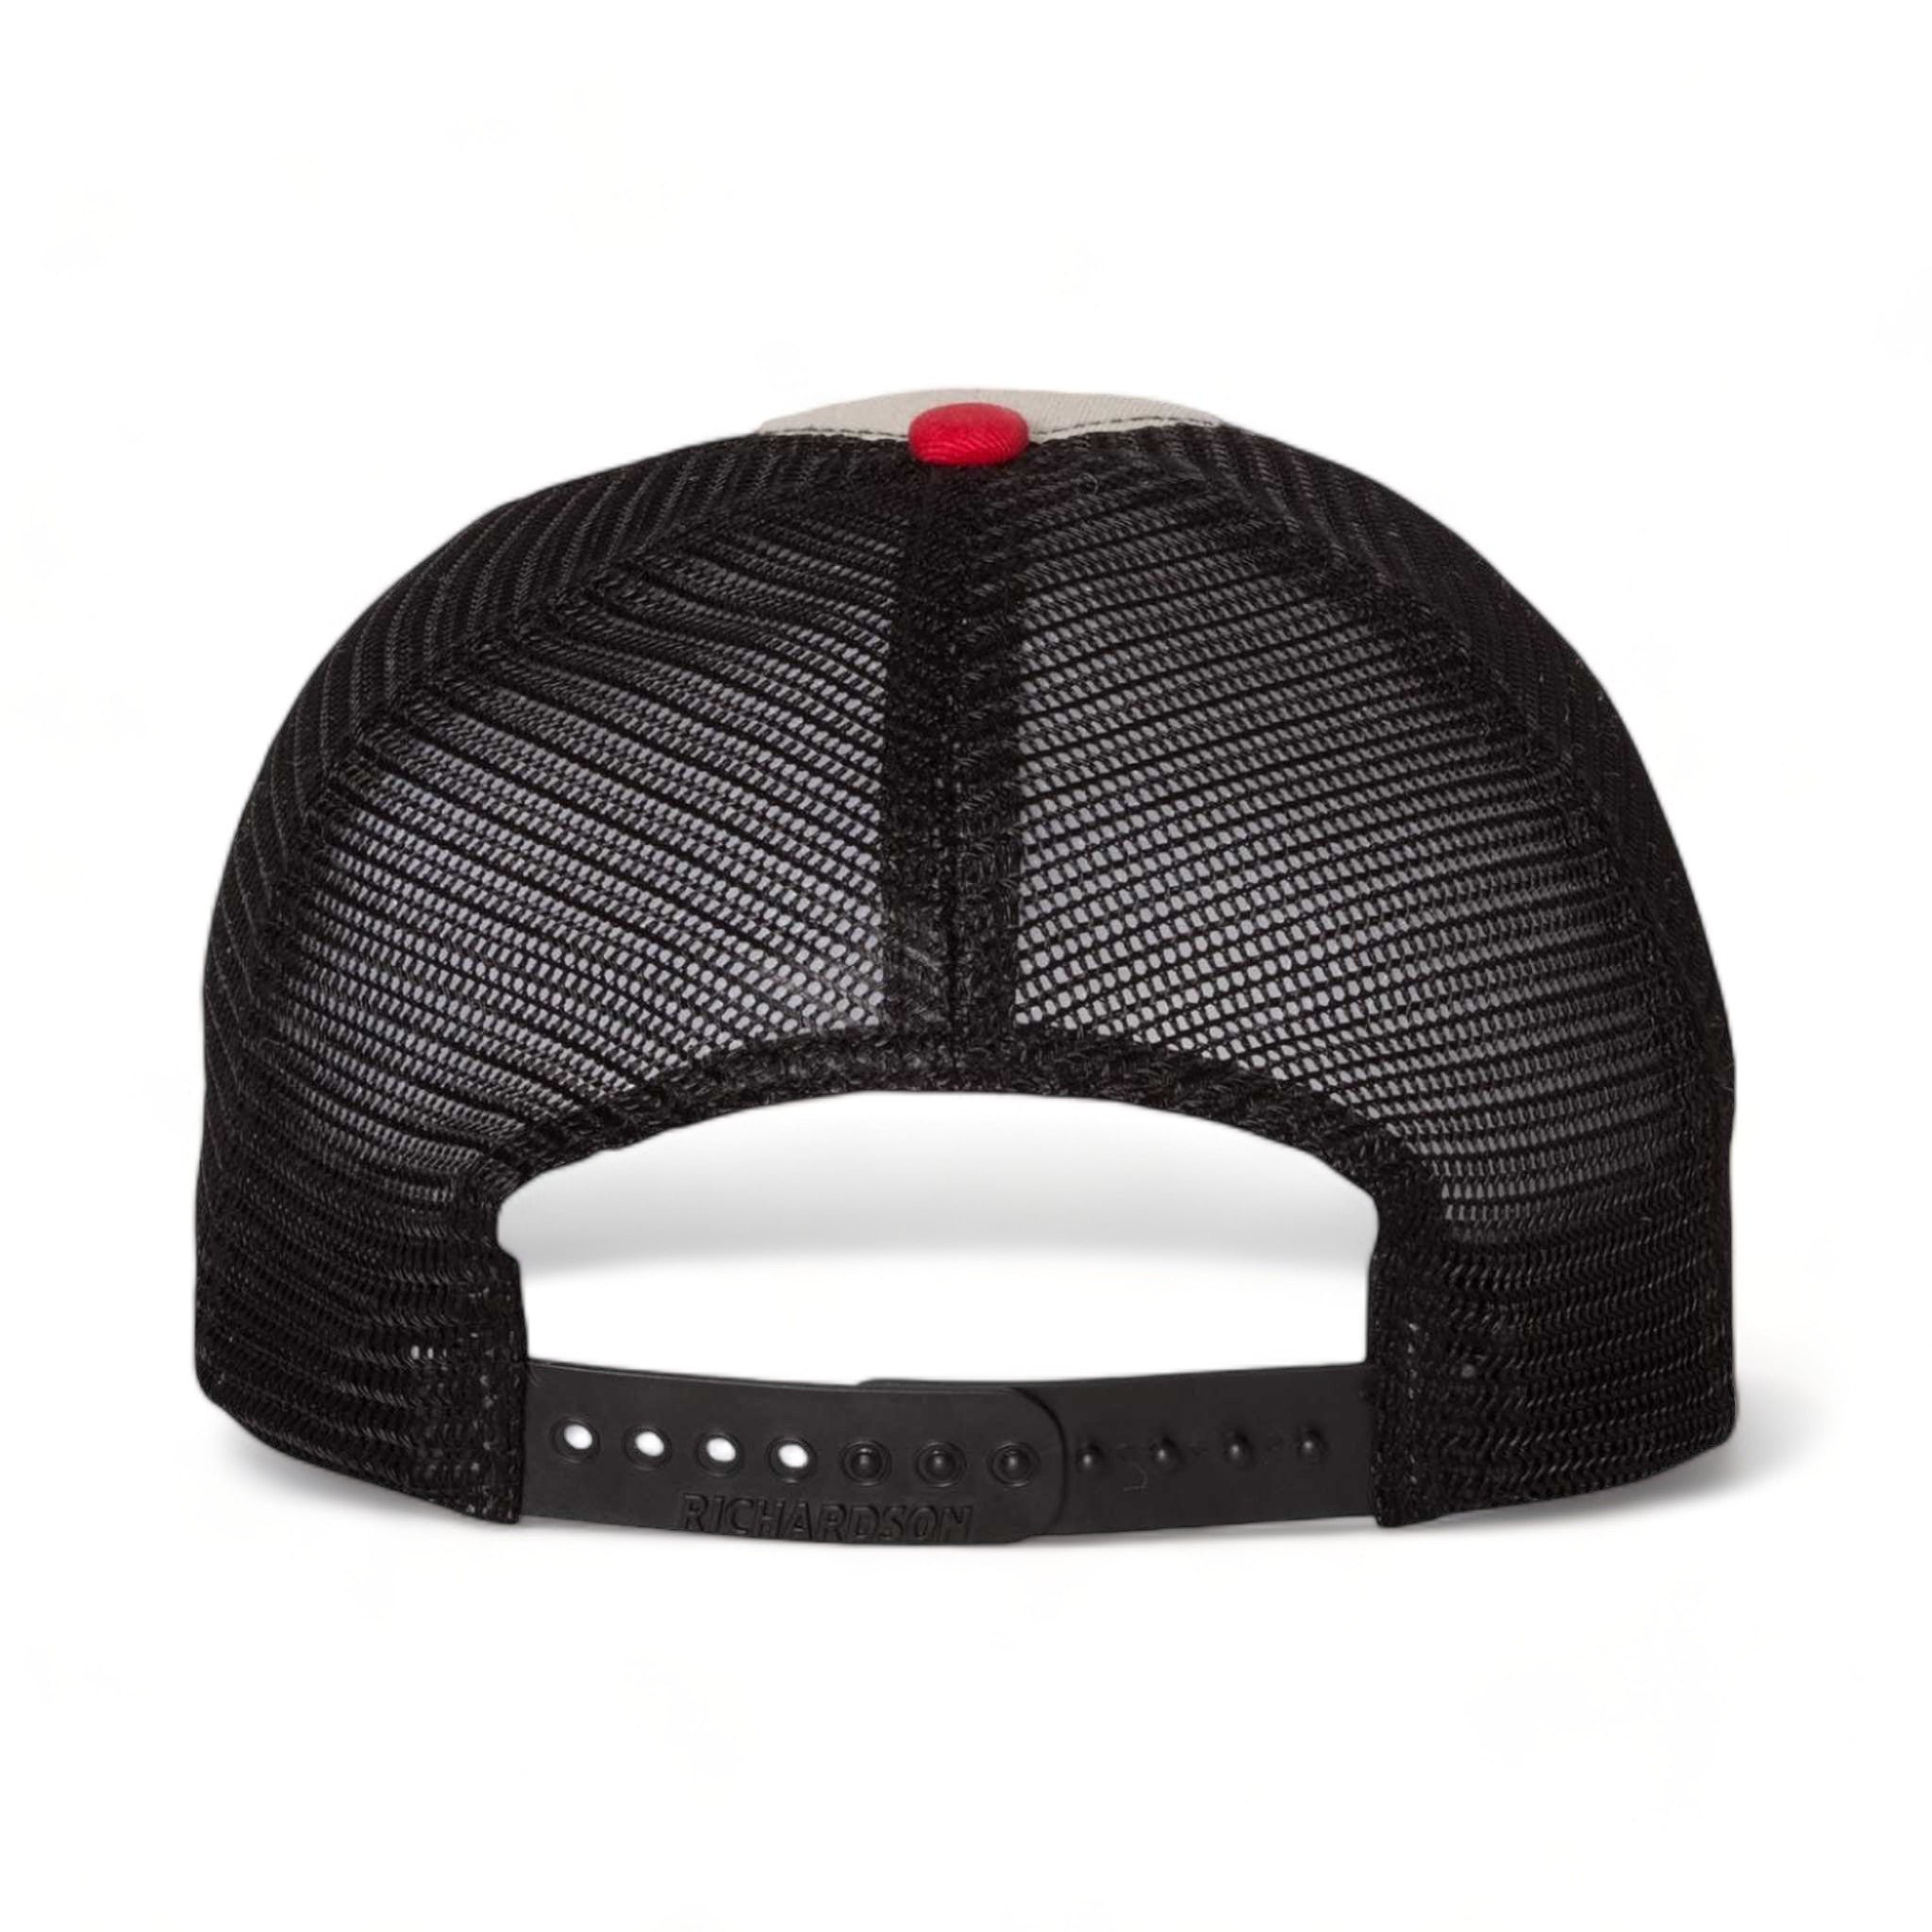 Back view of Richardson 111 custom hat in stone, black and red